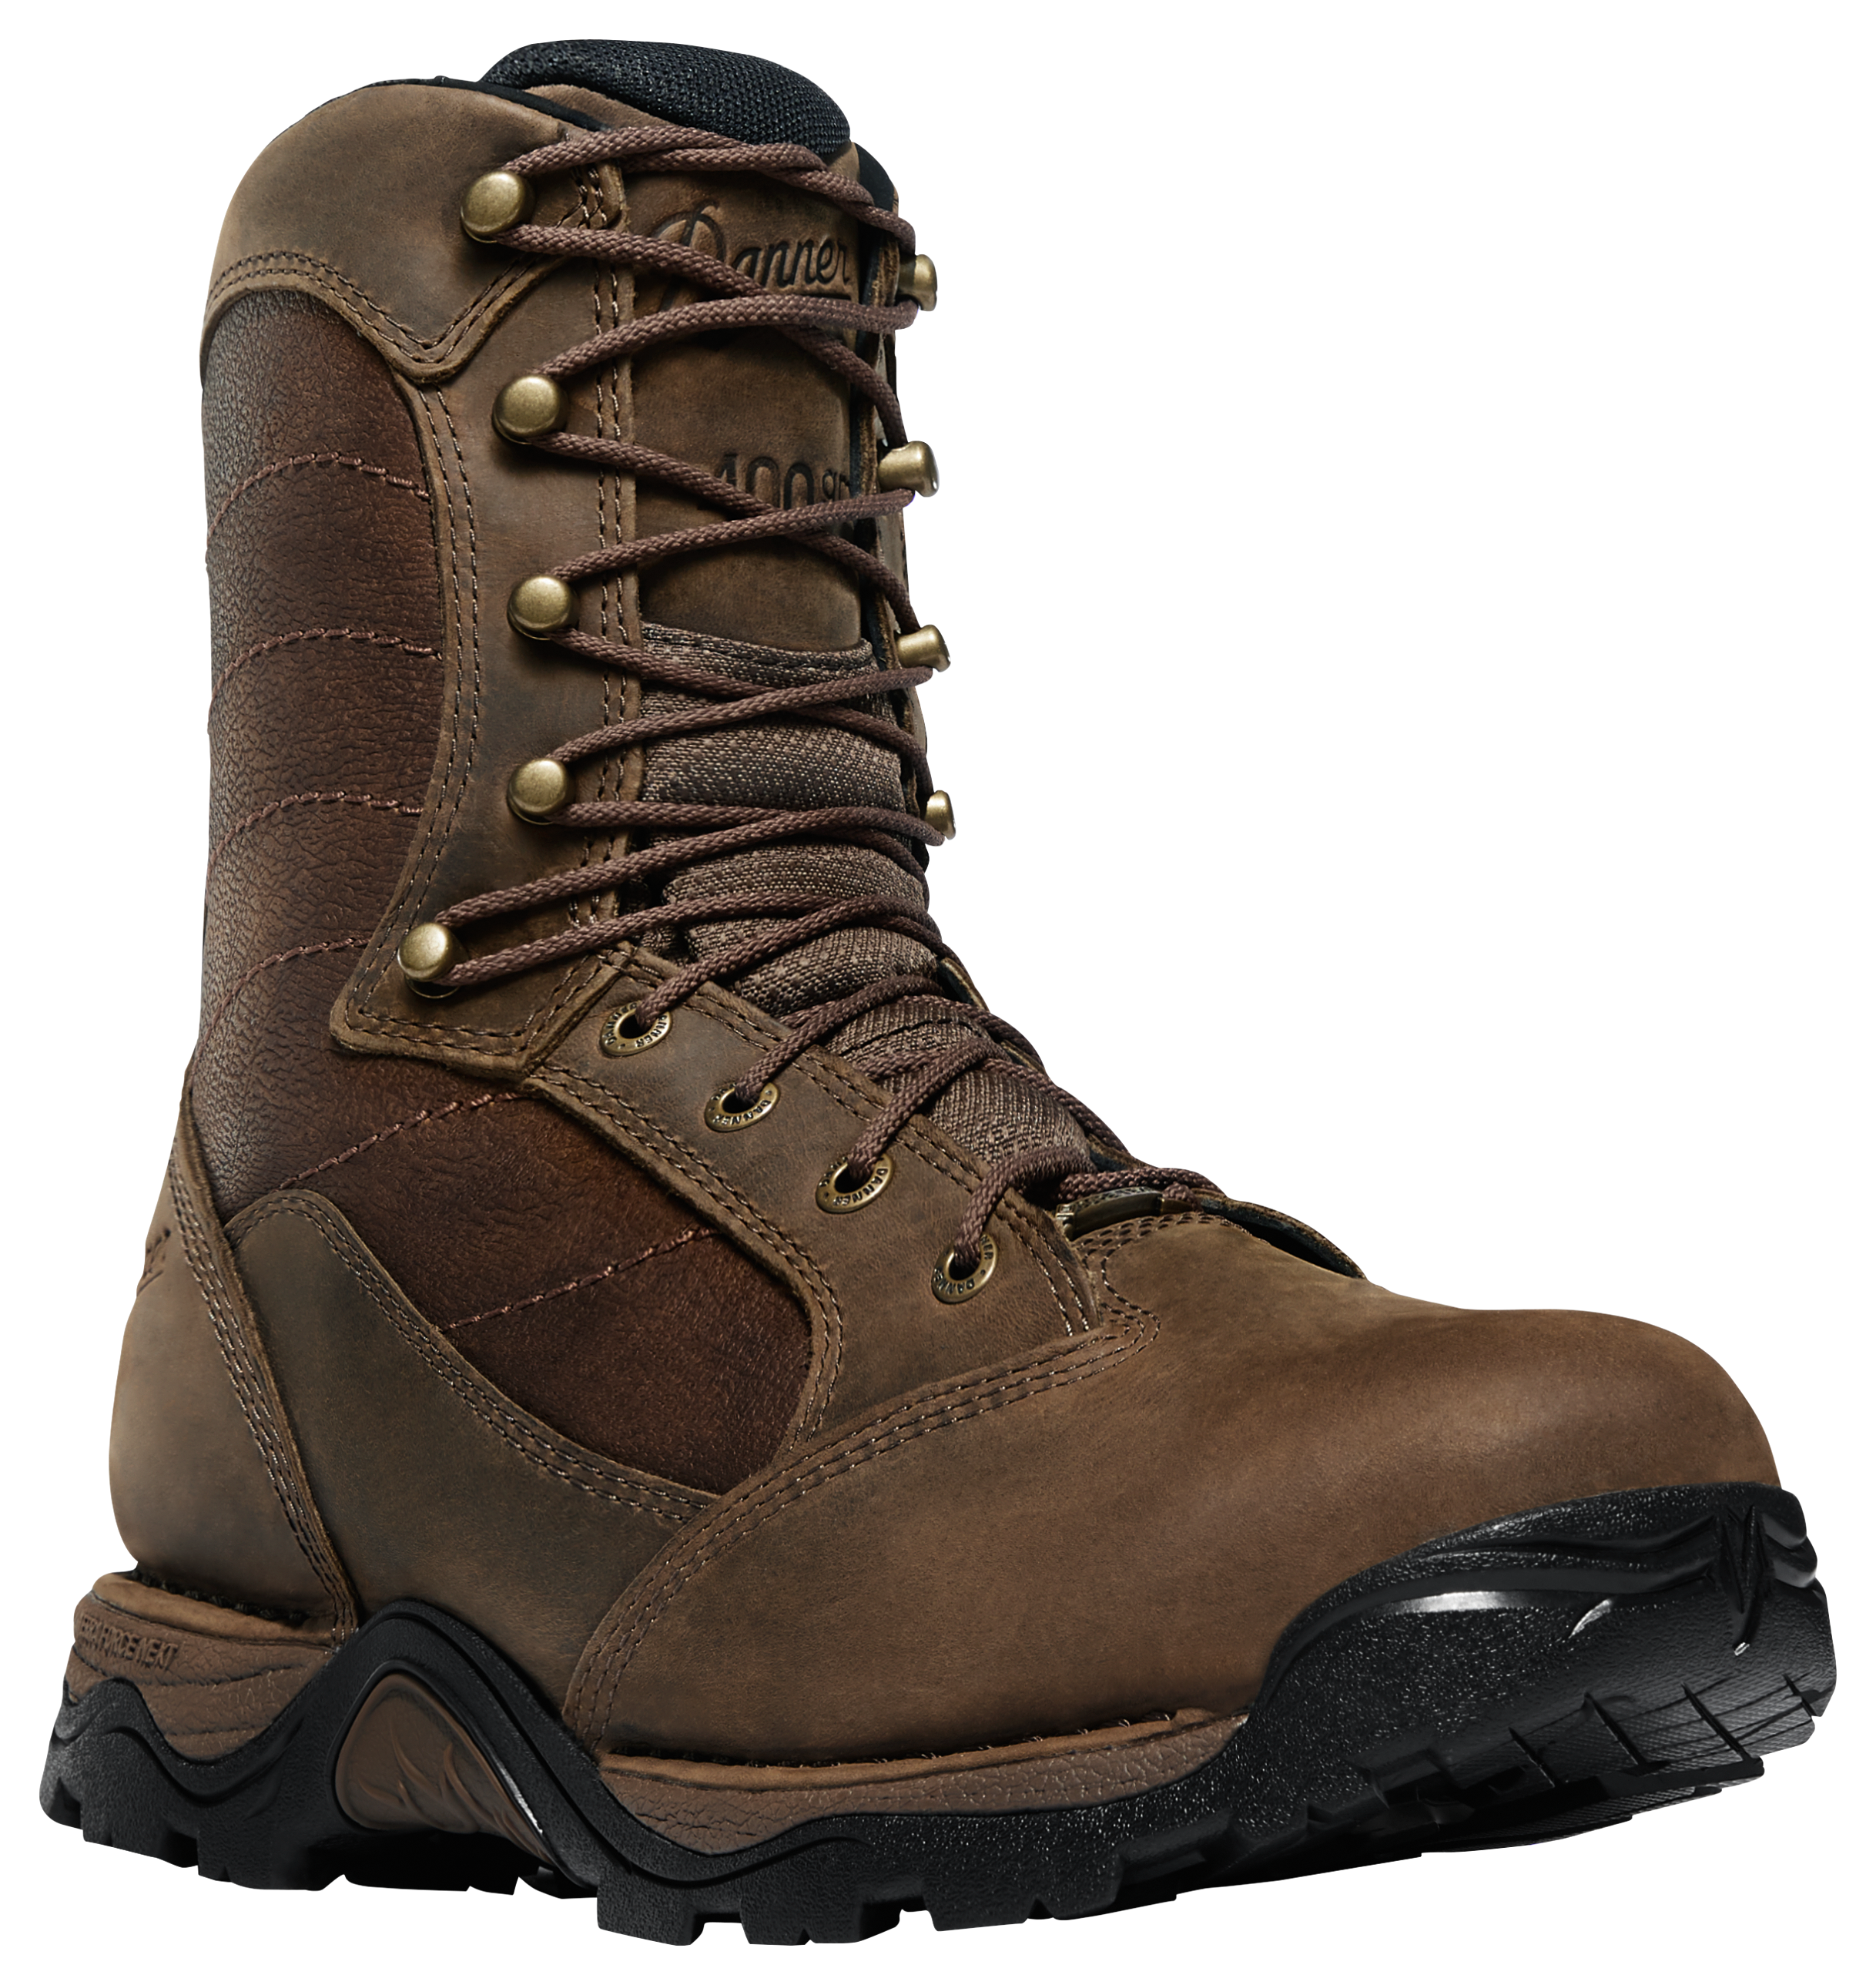 Danner Pronghorn Insulated GORE-TEX Leather Hunting Boots for Men